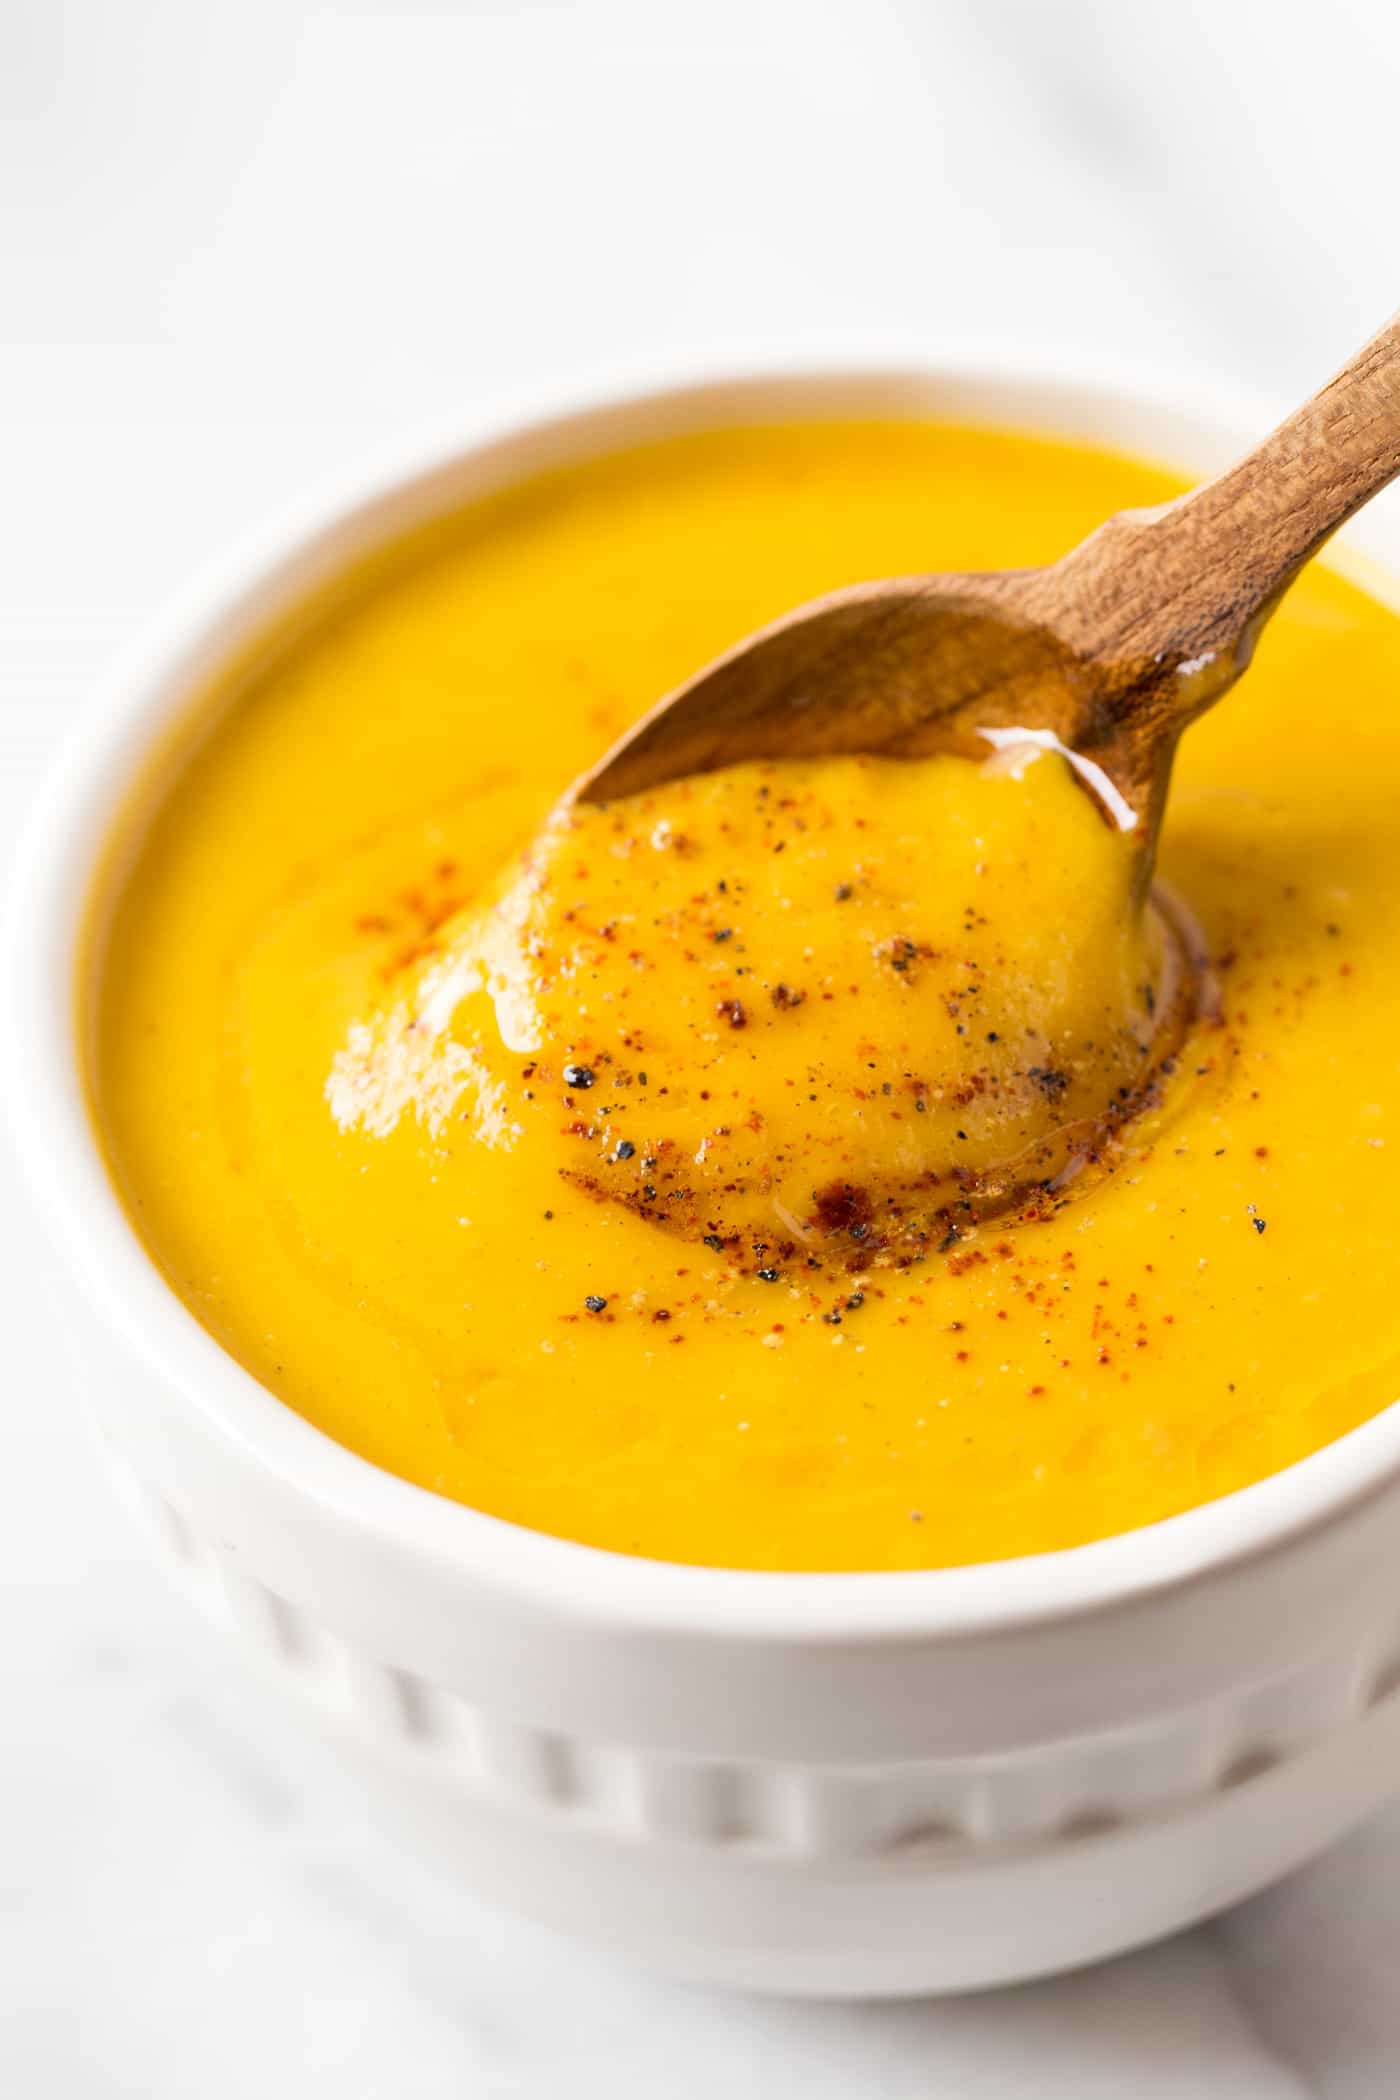 A spoon dipping into a bowl of squash soup topped with pepper and olive oil